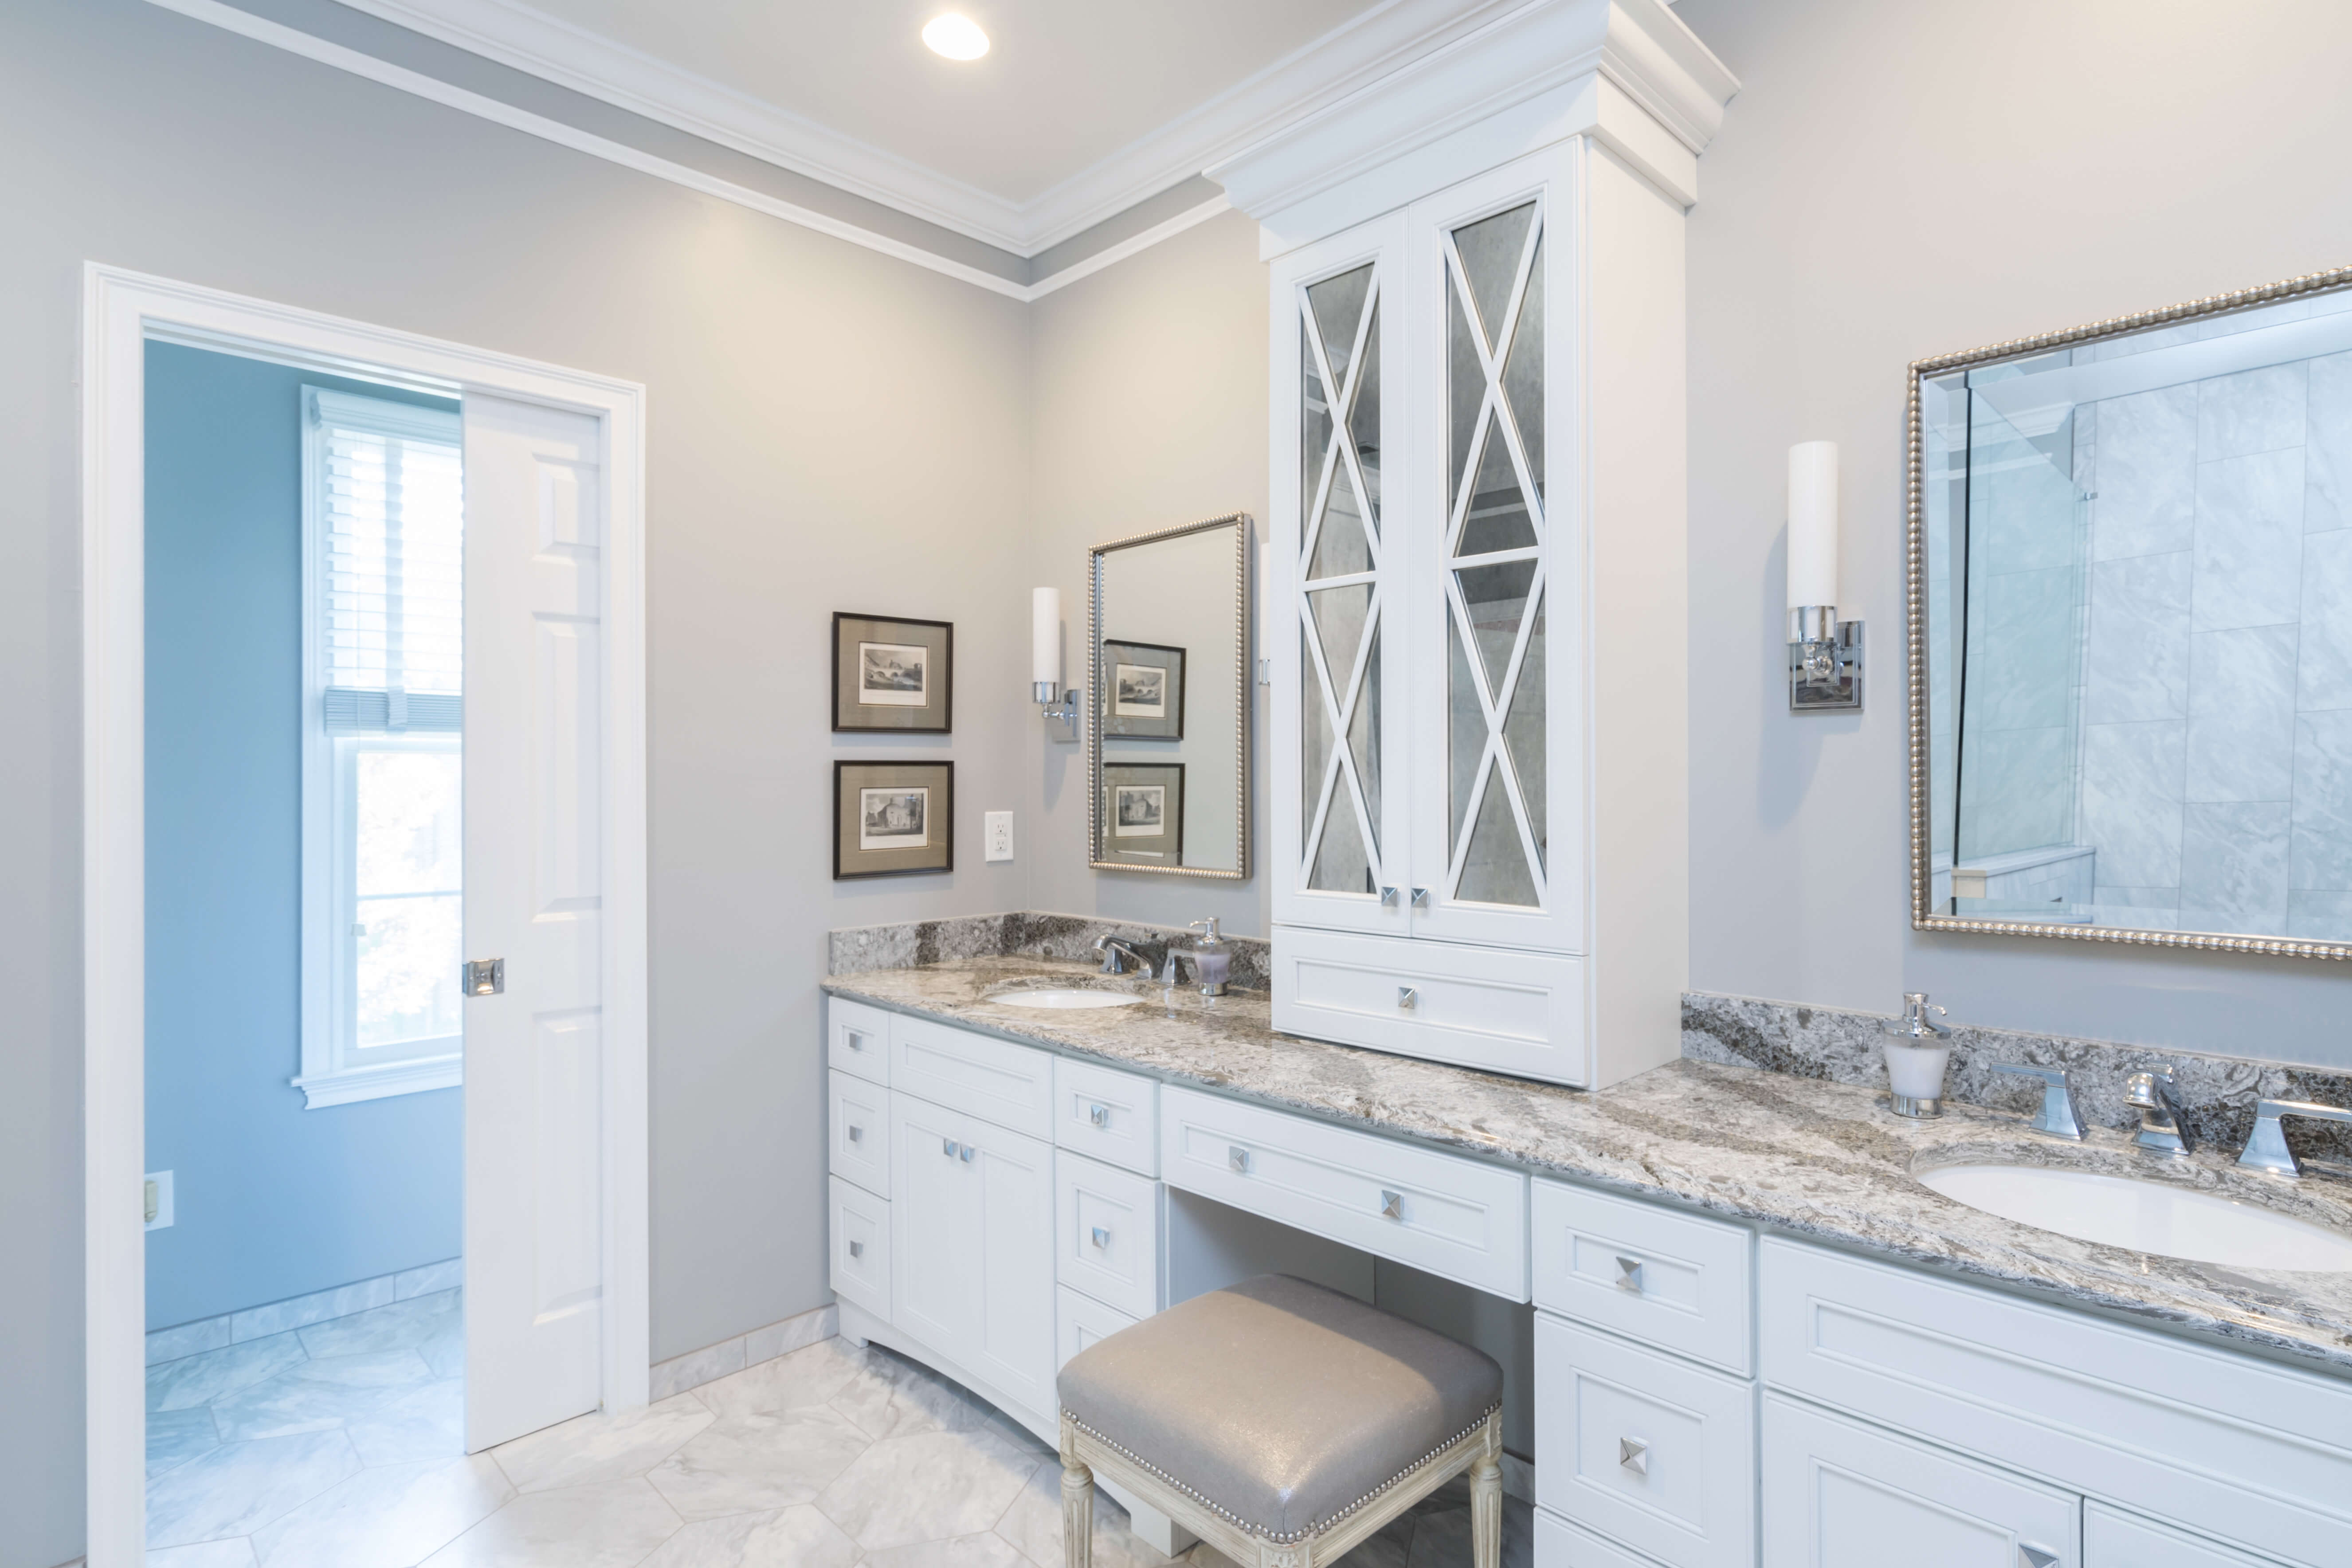 A master bathroom with an all-white color palette and X-patterned mullion cabinet doors.